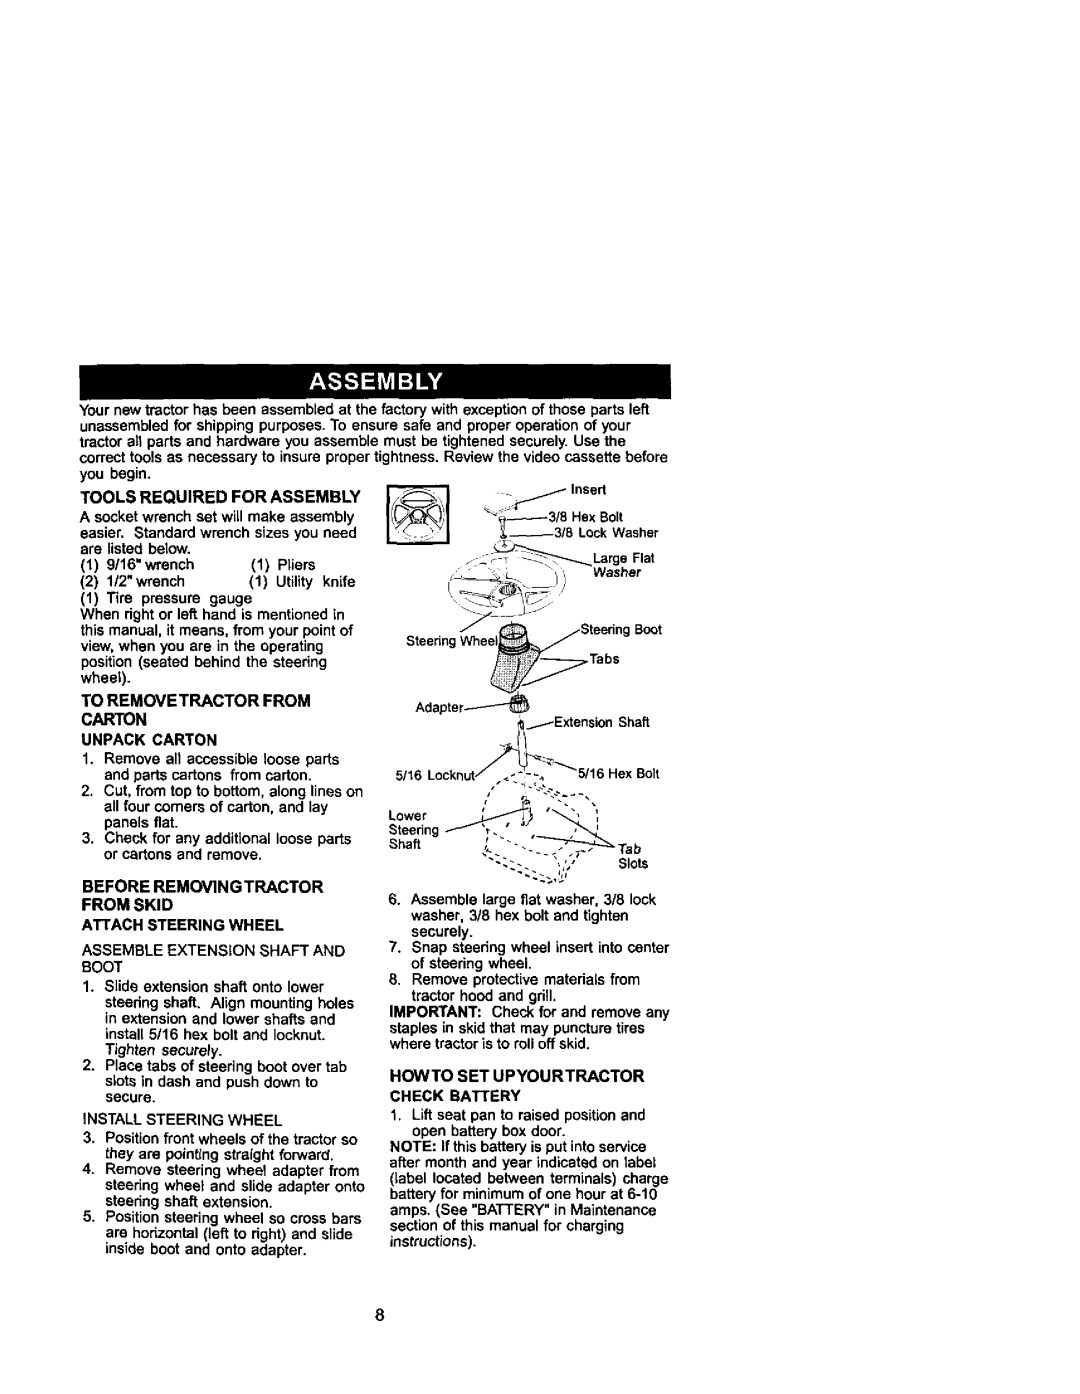 Craftsman 917.271742 owner manual Before Removingtractor From Skid, Attach Steering Wheel 